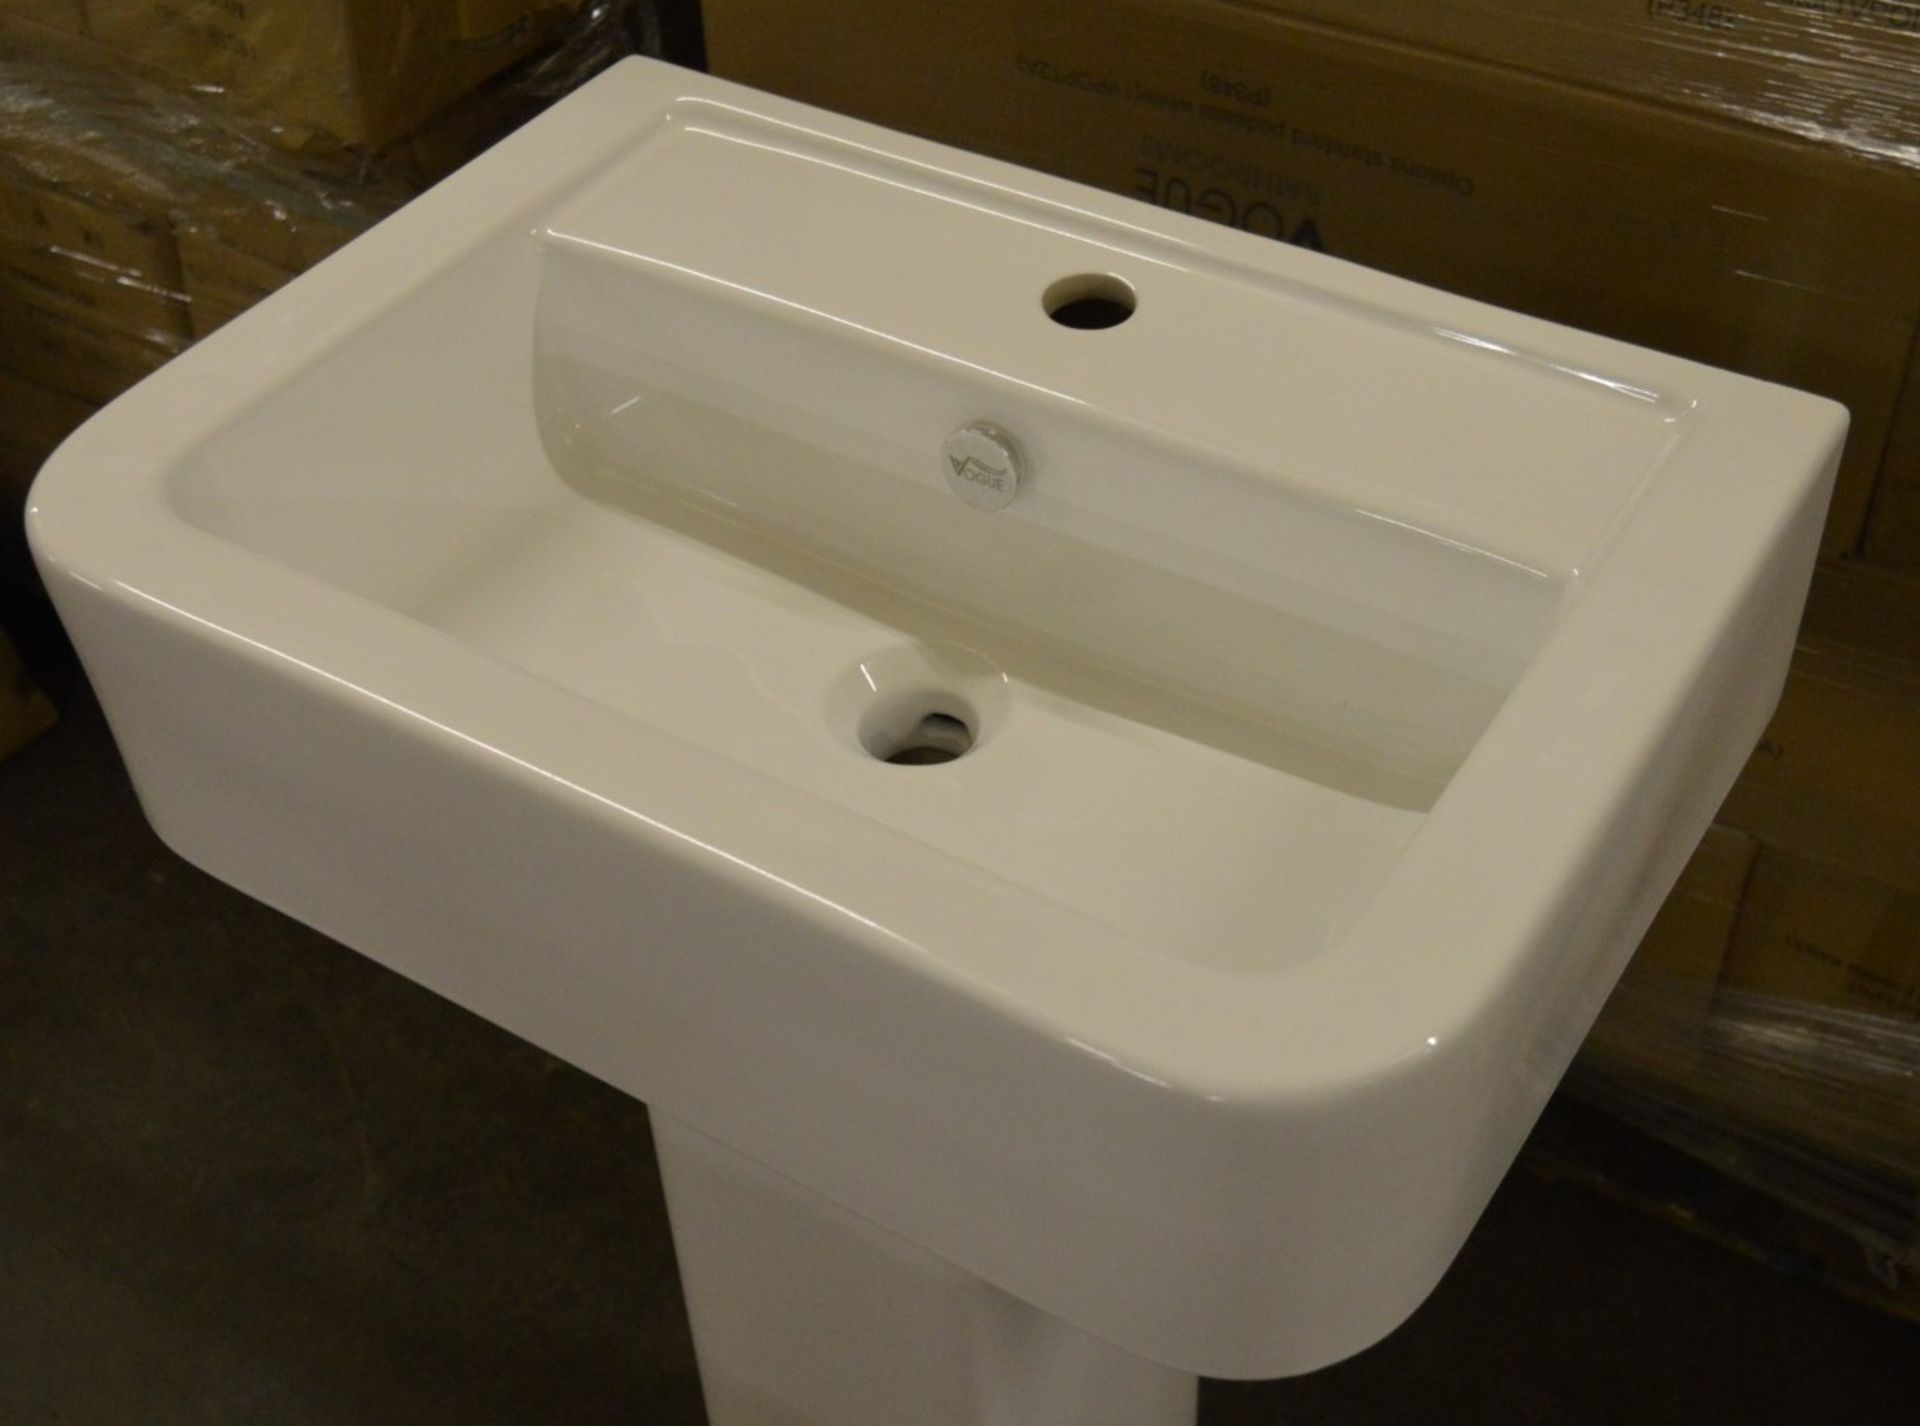 1 x Vogue Bathrooms OPTIONS Single Tap Hole SINK BASIN With Pedestal - 580mm Width - Brand New Boxed - Image 2 of 8